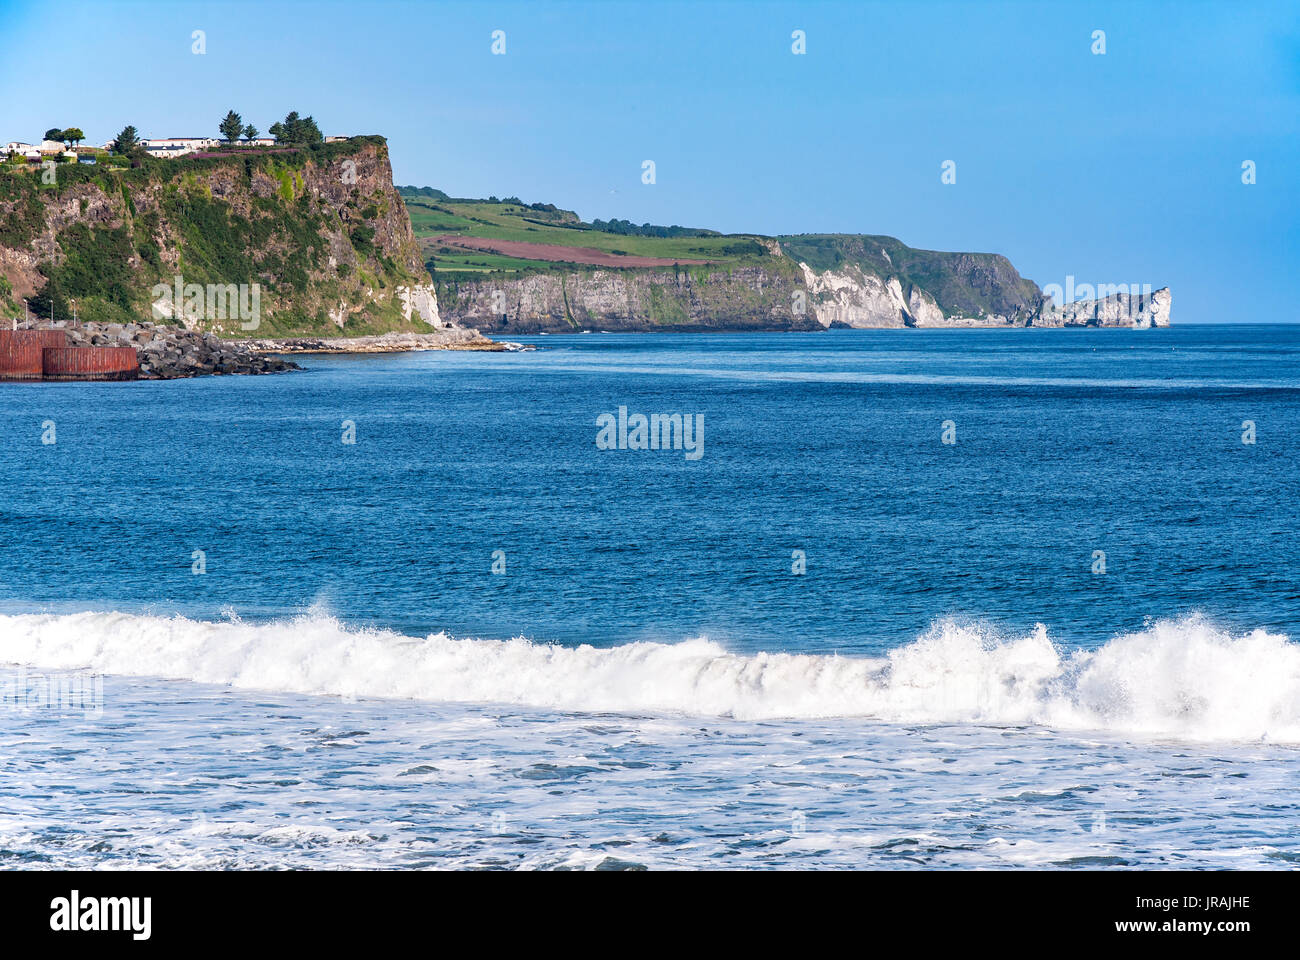 Atlantic coast with a steep cliffs and waves at Ballycastle, County Antrim, Northern Ireland, UK Stock Photo